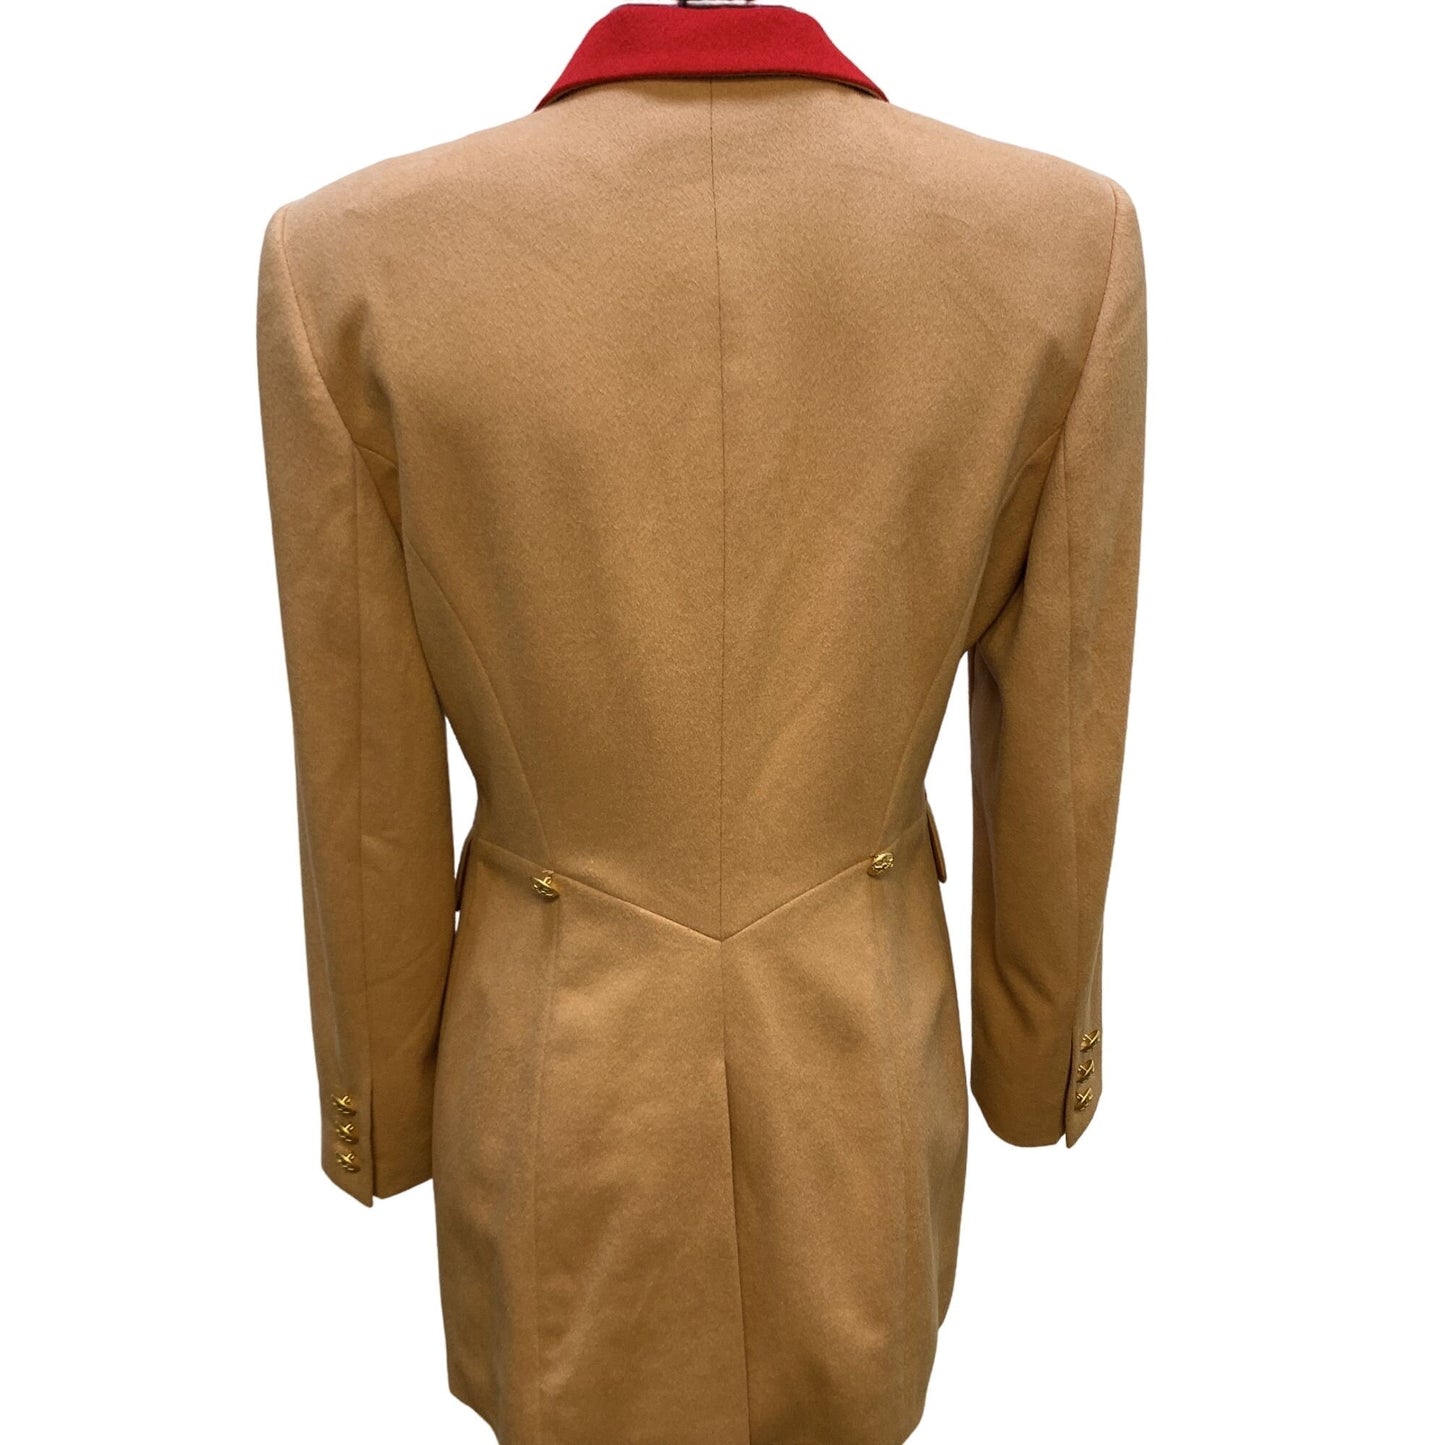 *Escada Brown & Red Wool Jacket Size 36/Small